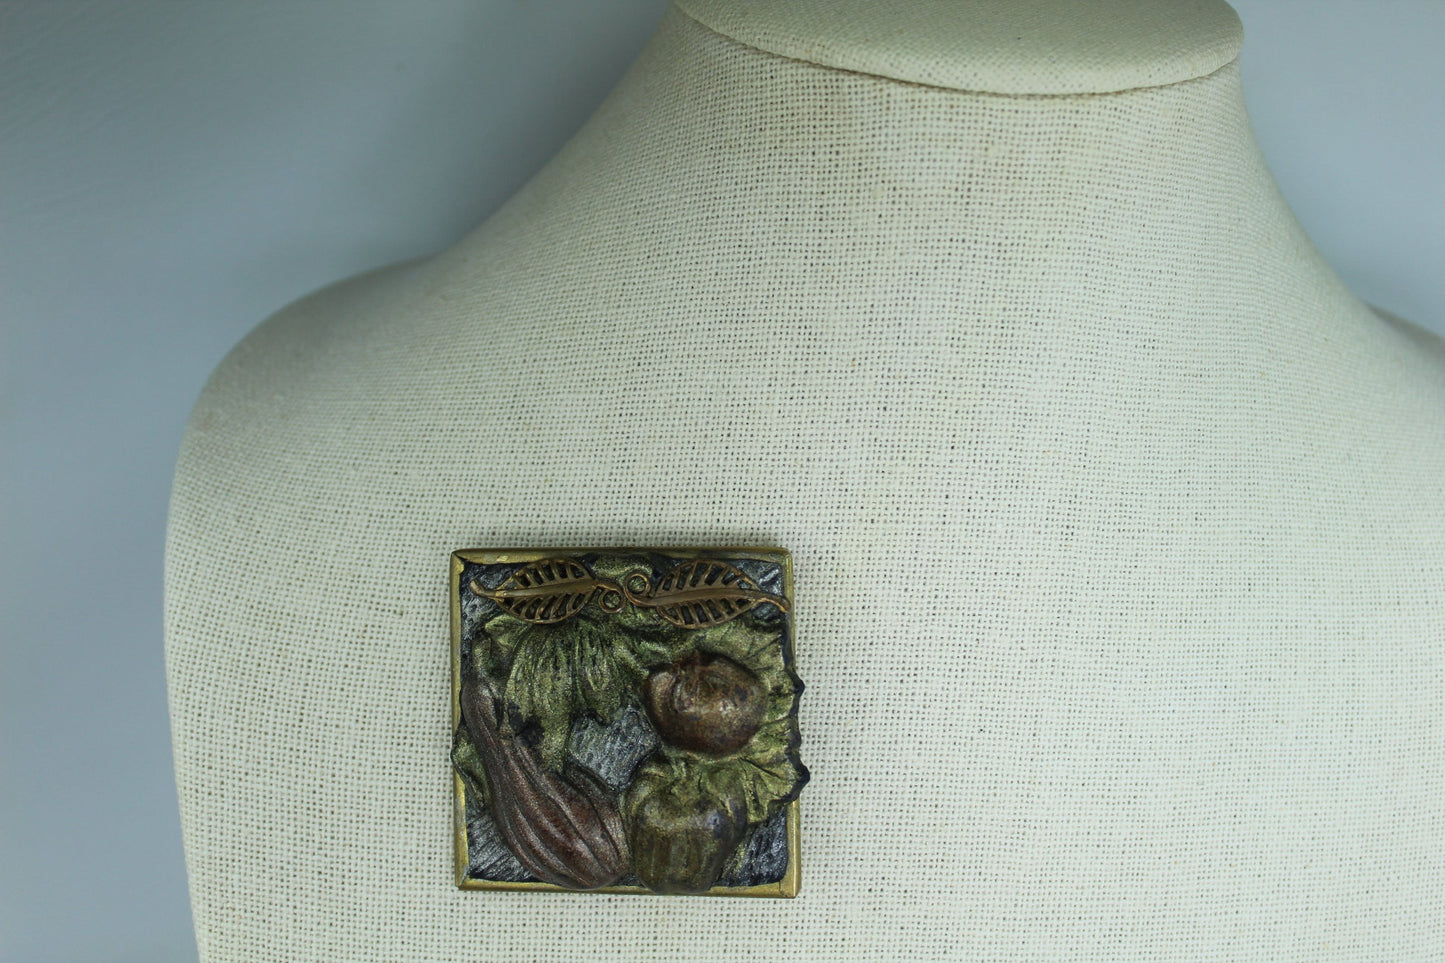 Artisan Vegetable Pin Brooch - Metallic Clay on Glass Eggplant Pepper - 2" Square striking one of kind